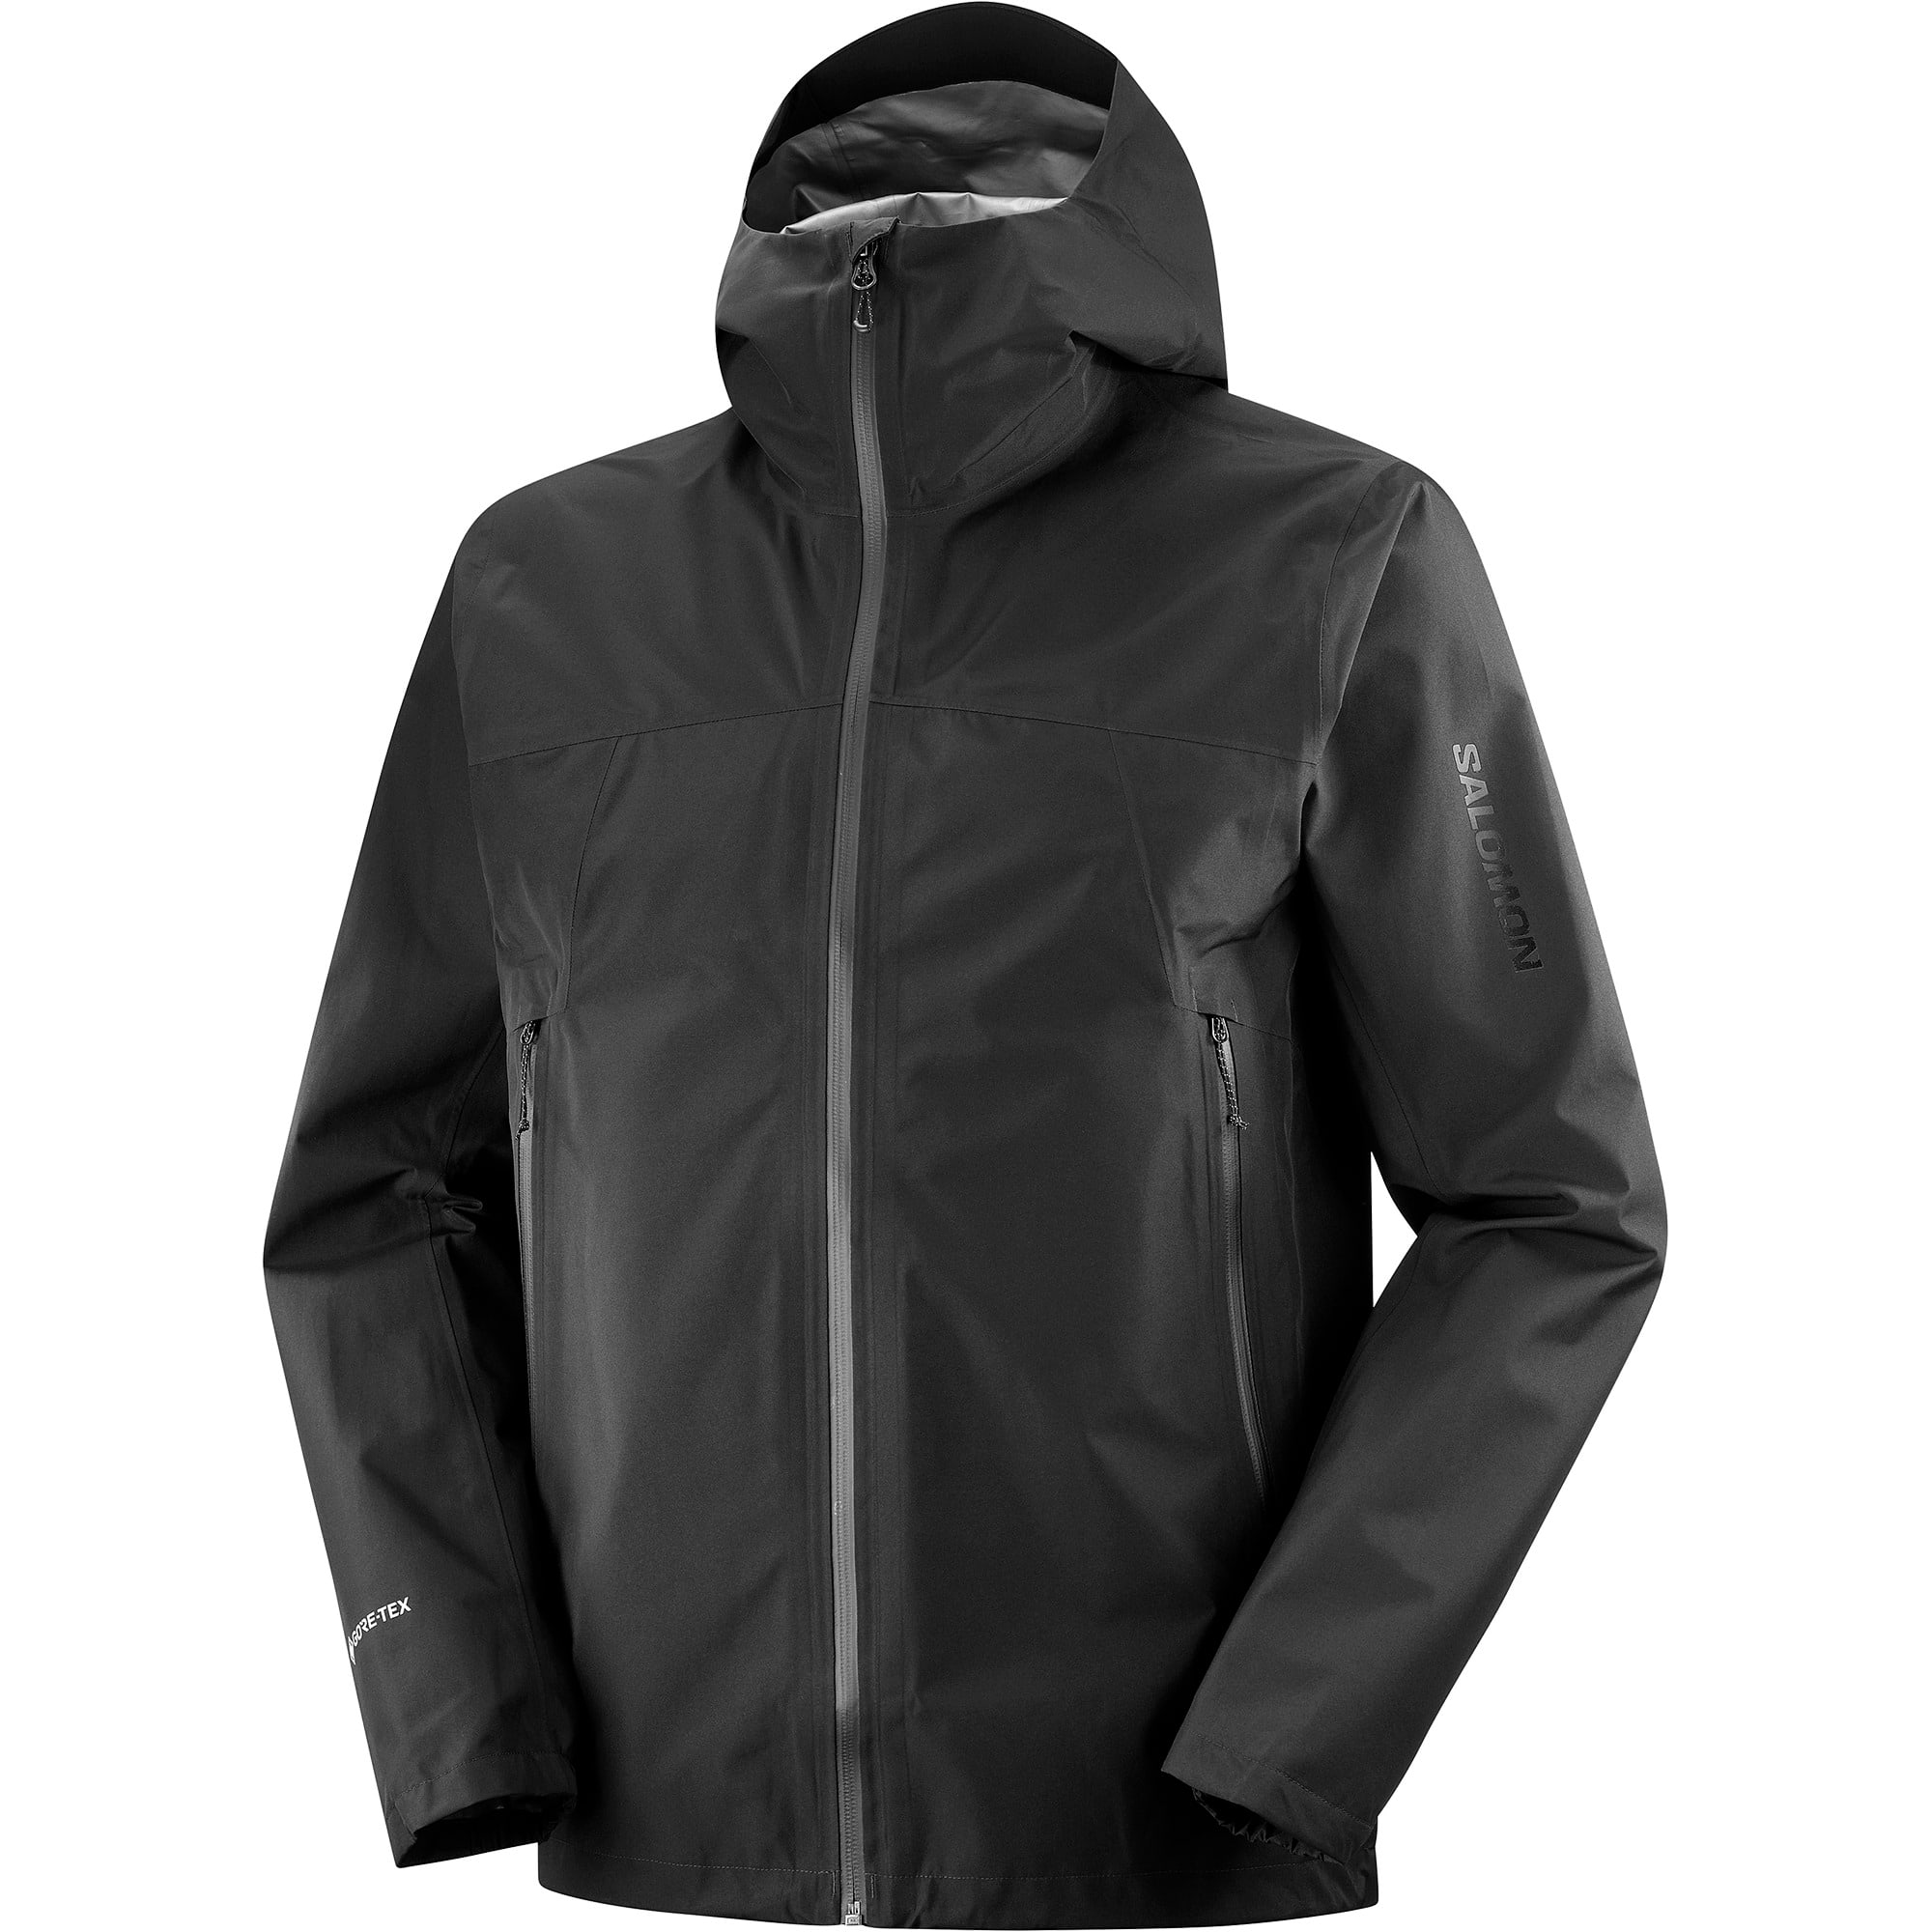 Buy Salomon Men's Outline GORE-TEX 2.5 Layer Jacket from Outnorth